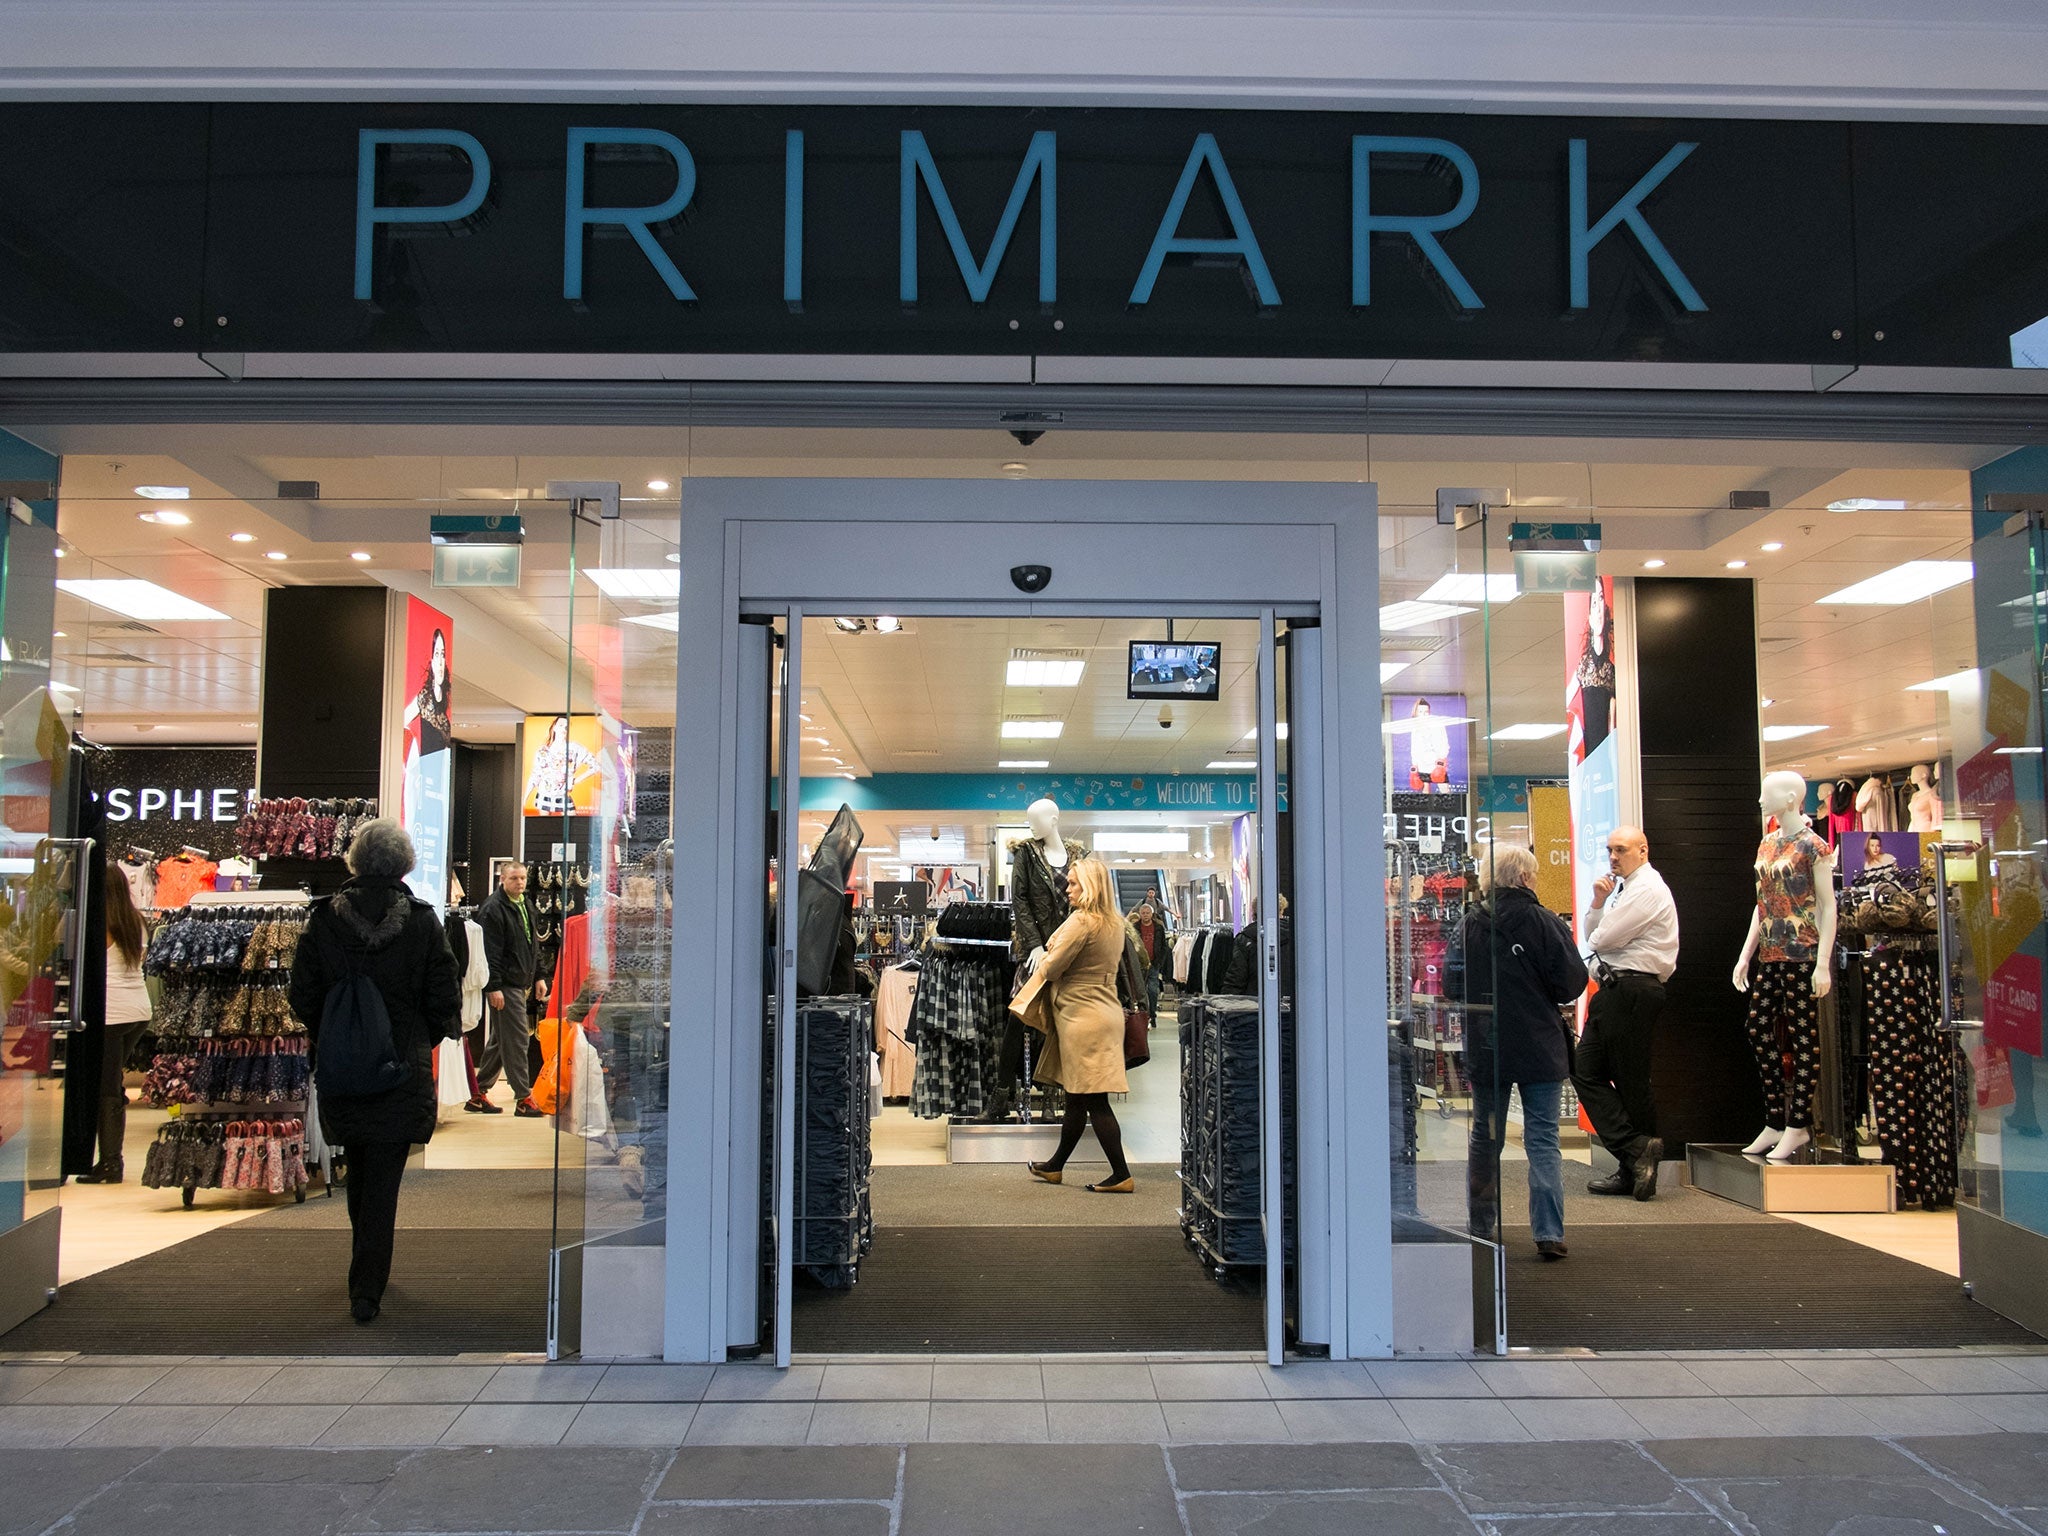 &#13;
Primark confirmed at the time that CCTV images proved there was no altercation&#13;